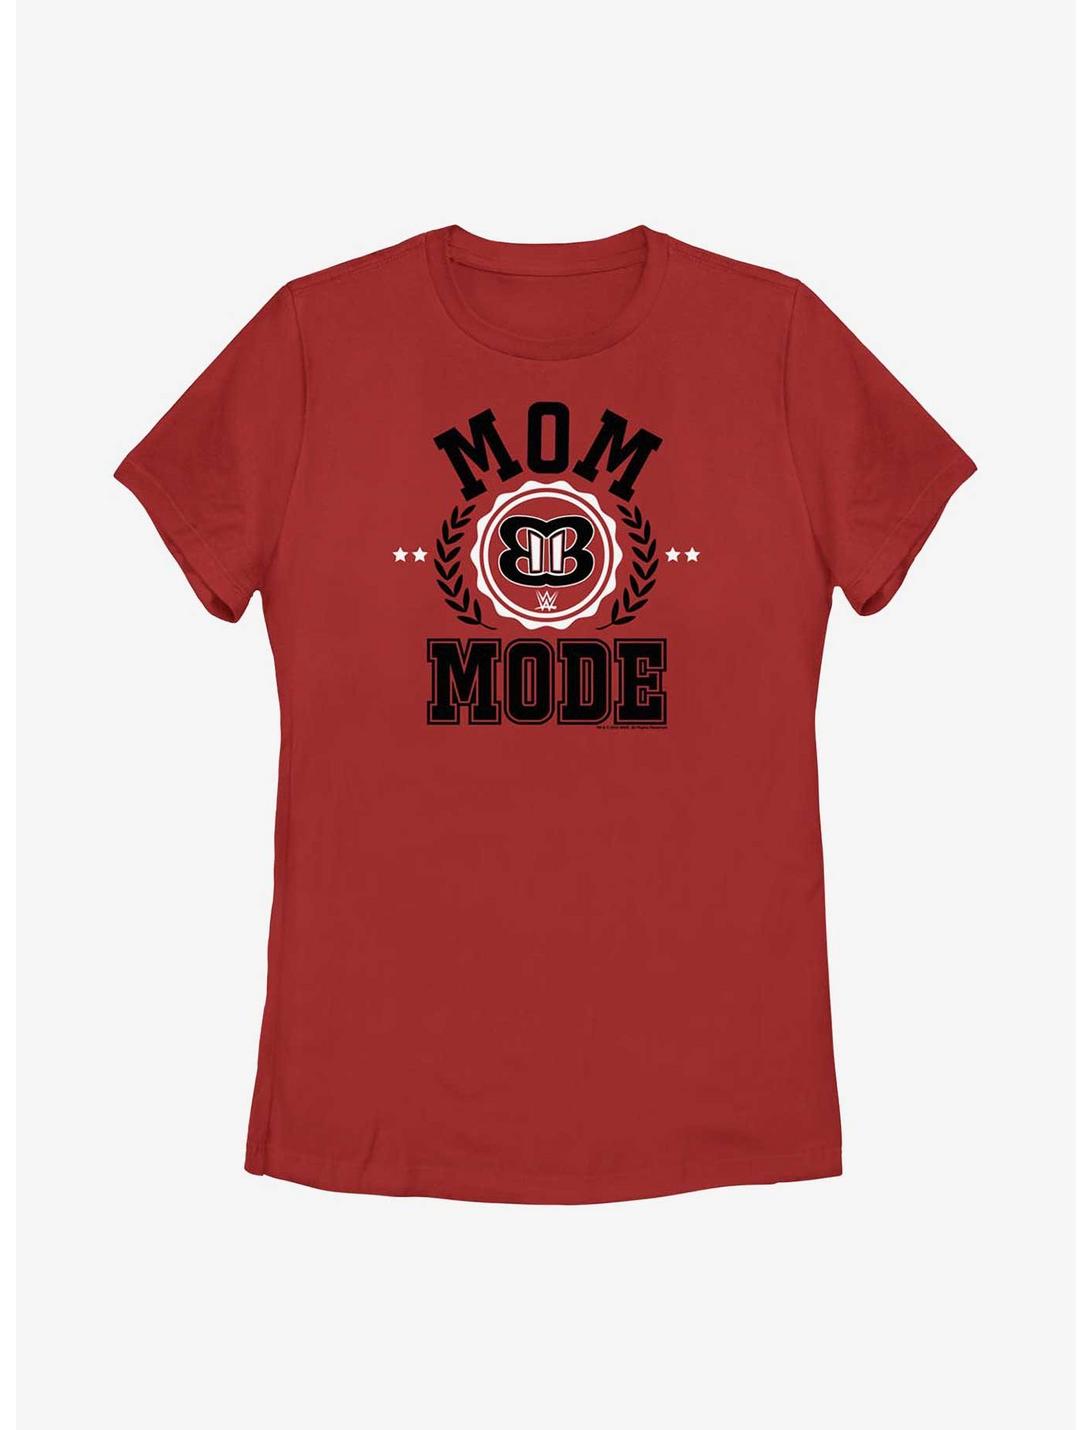 WWE The Bella Twins Mom Mode Womens T-Shirt, RED, hi-res